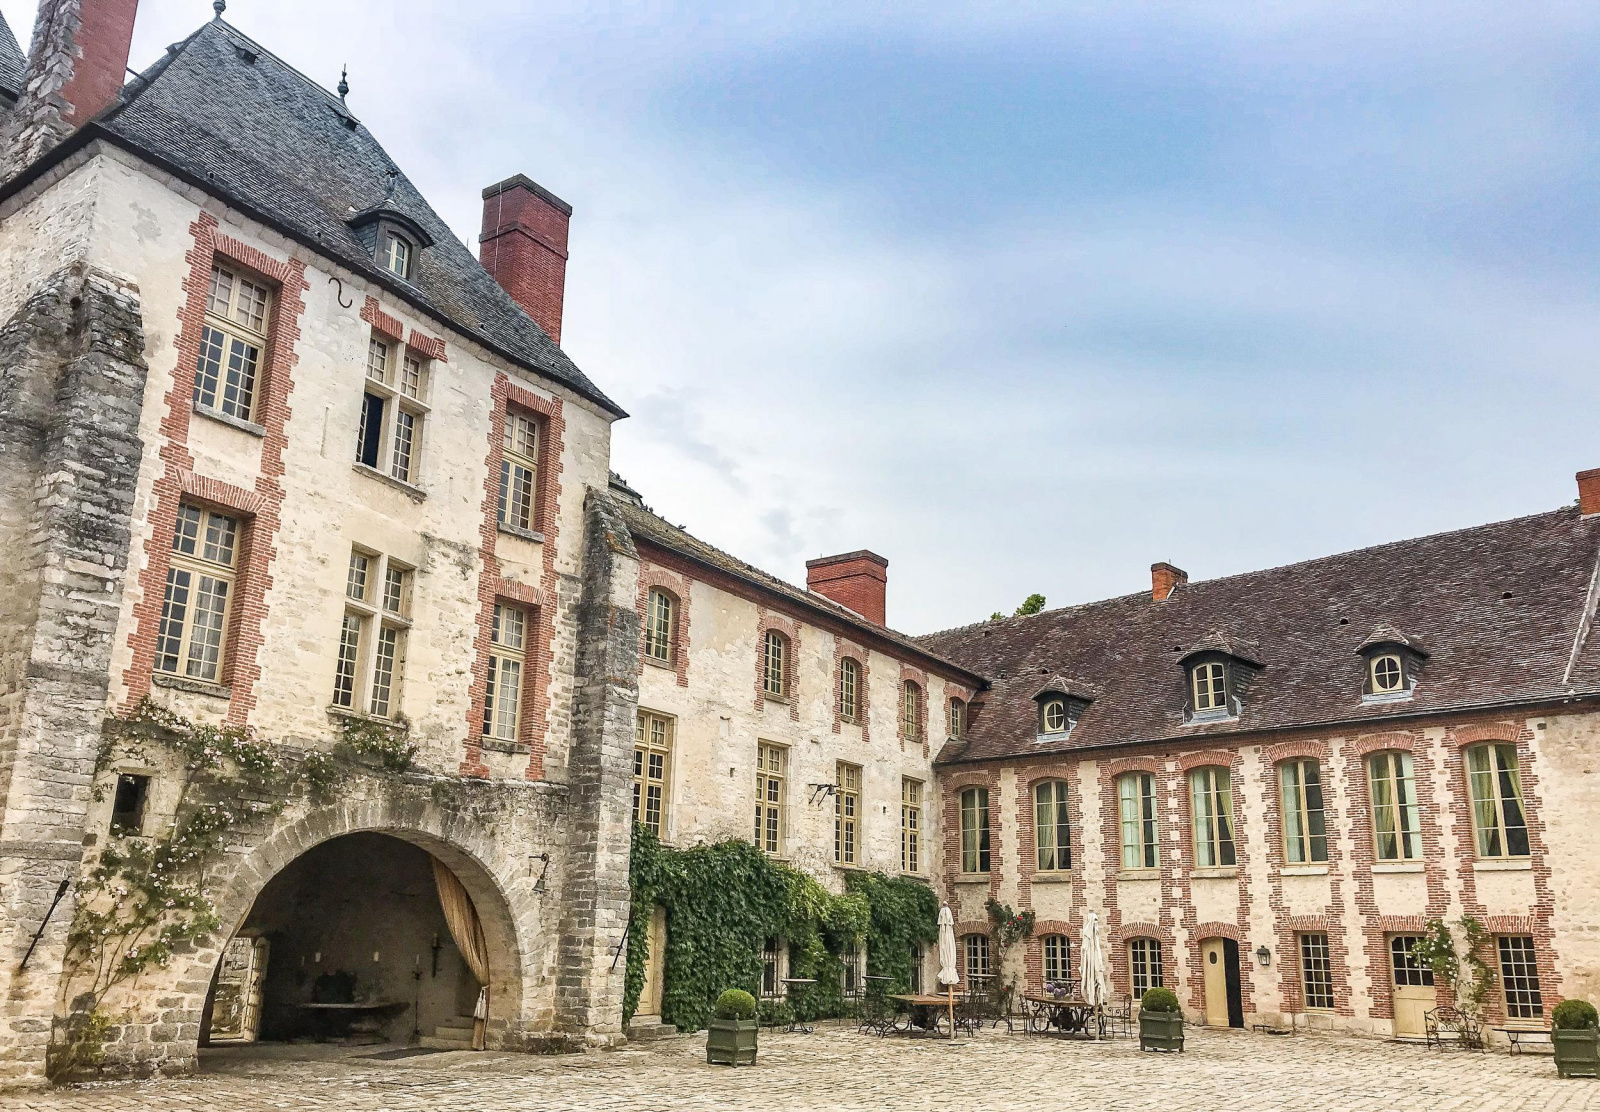 Our B2B trade furniture can be found at the beautiful Château de Farcheville in France